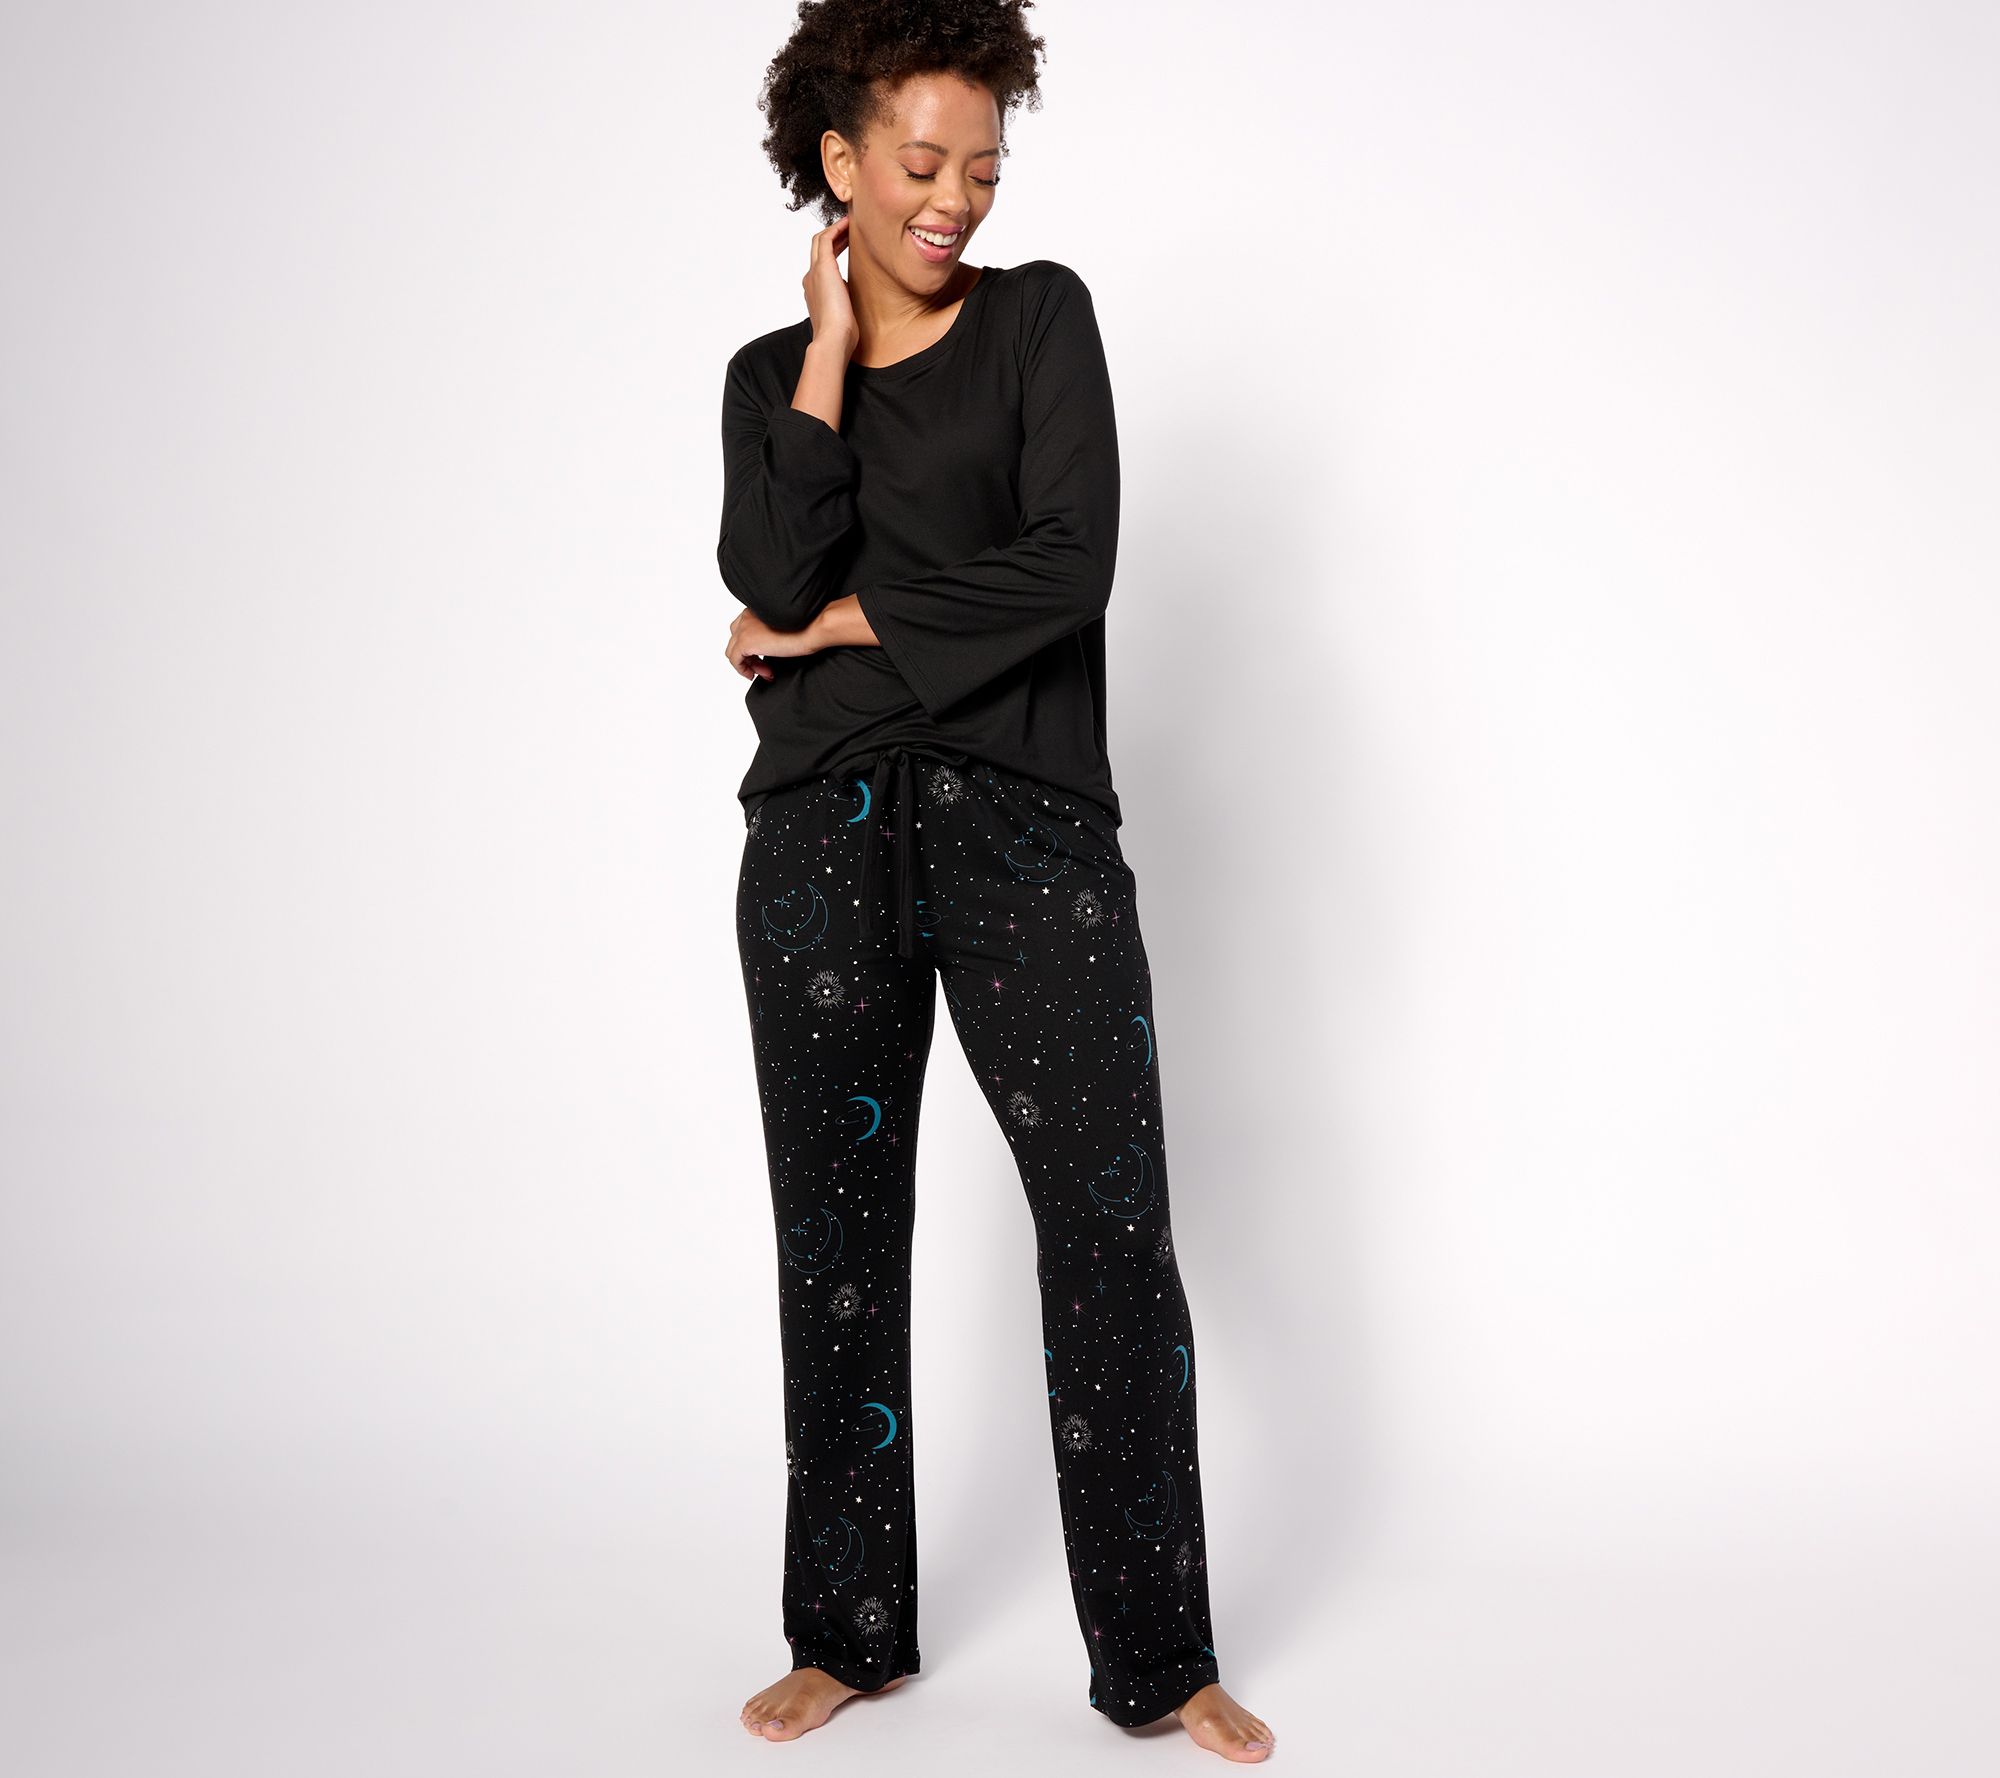 Look, it's a pajama set for tall women!!!